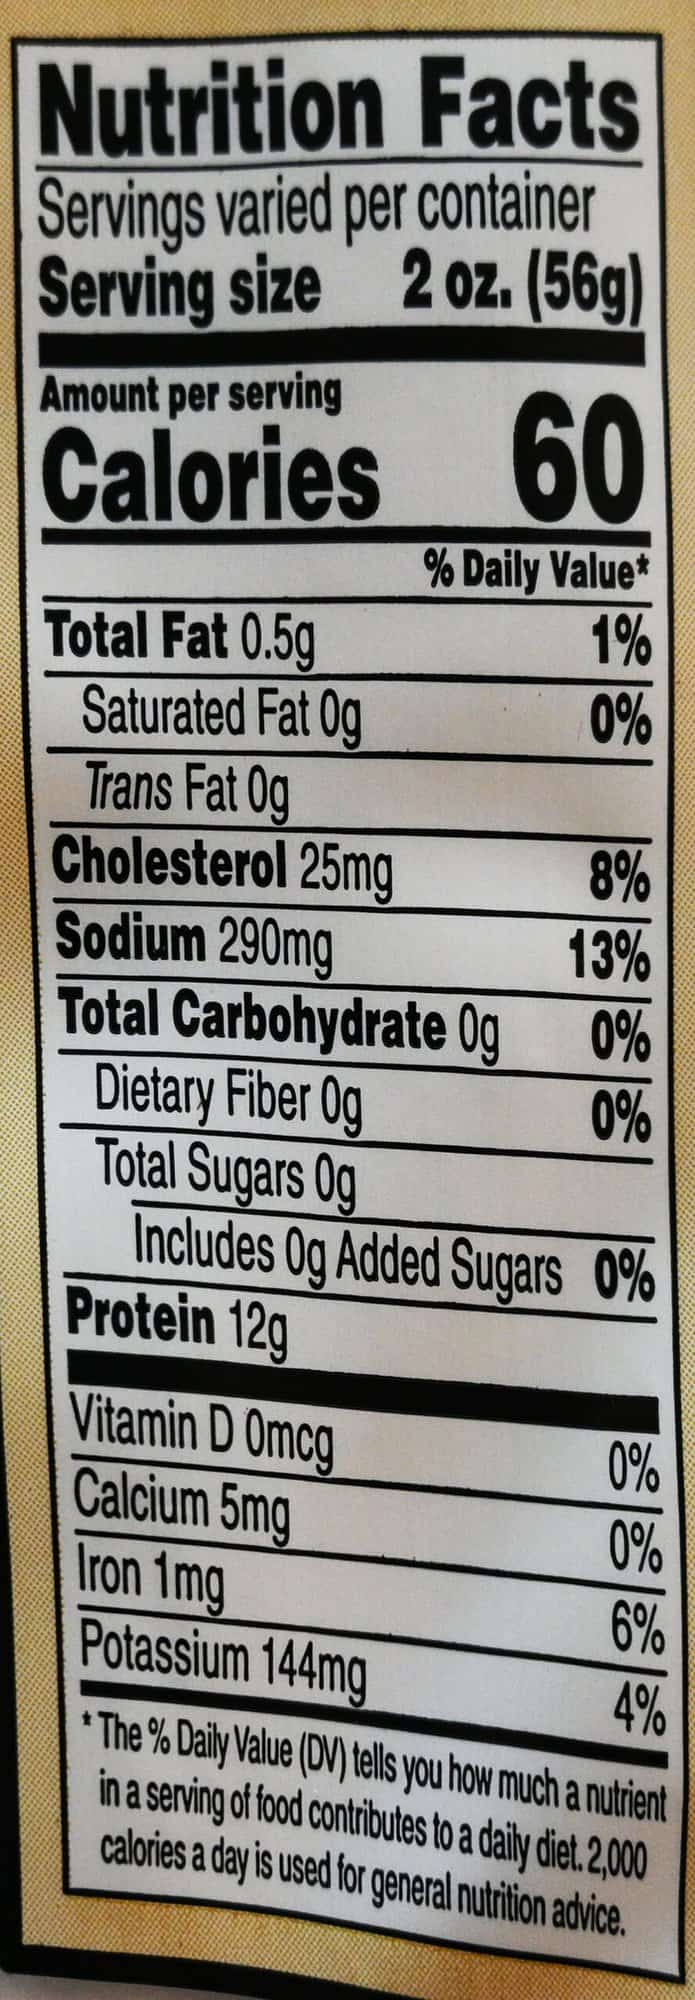 The turkey breast nutrition facts label from the package.